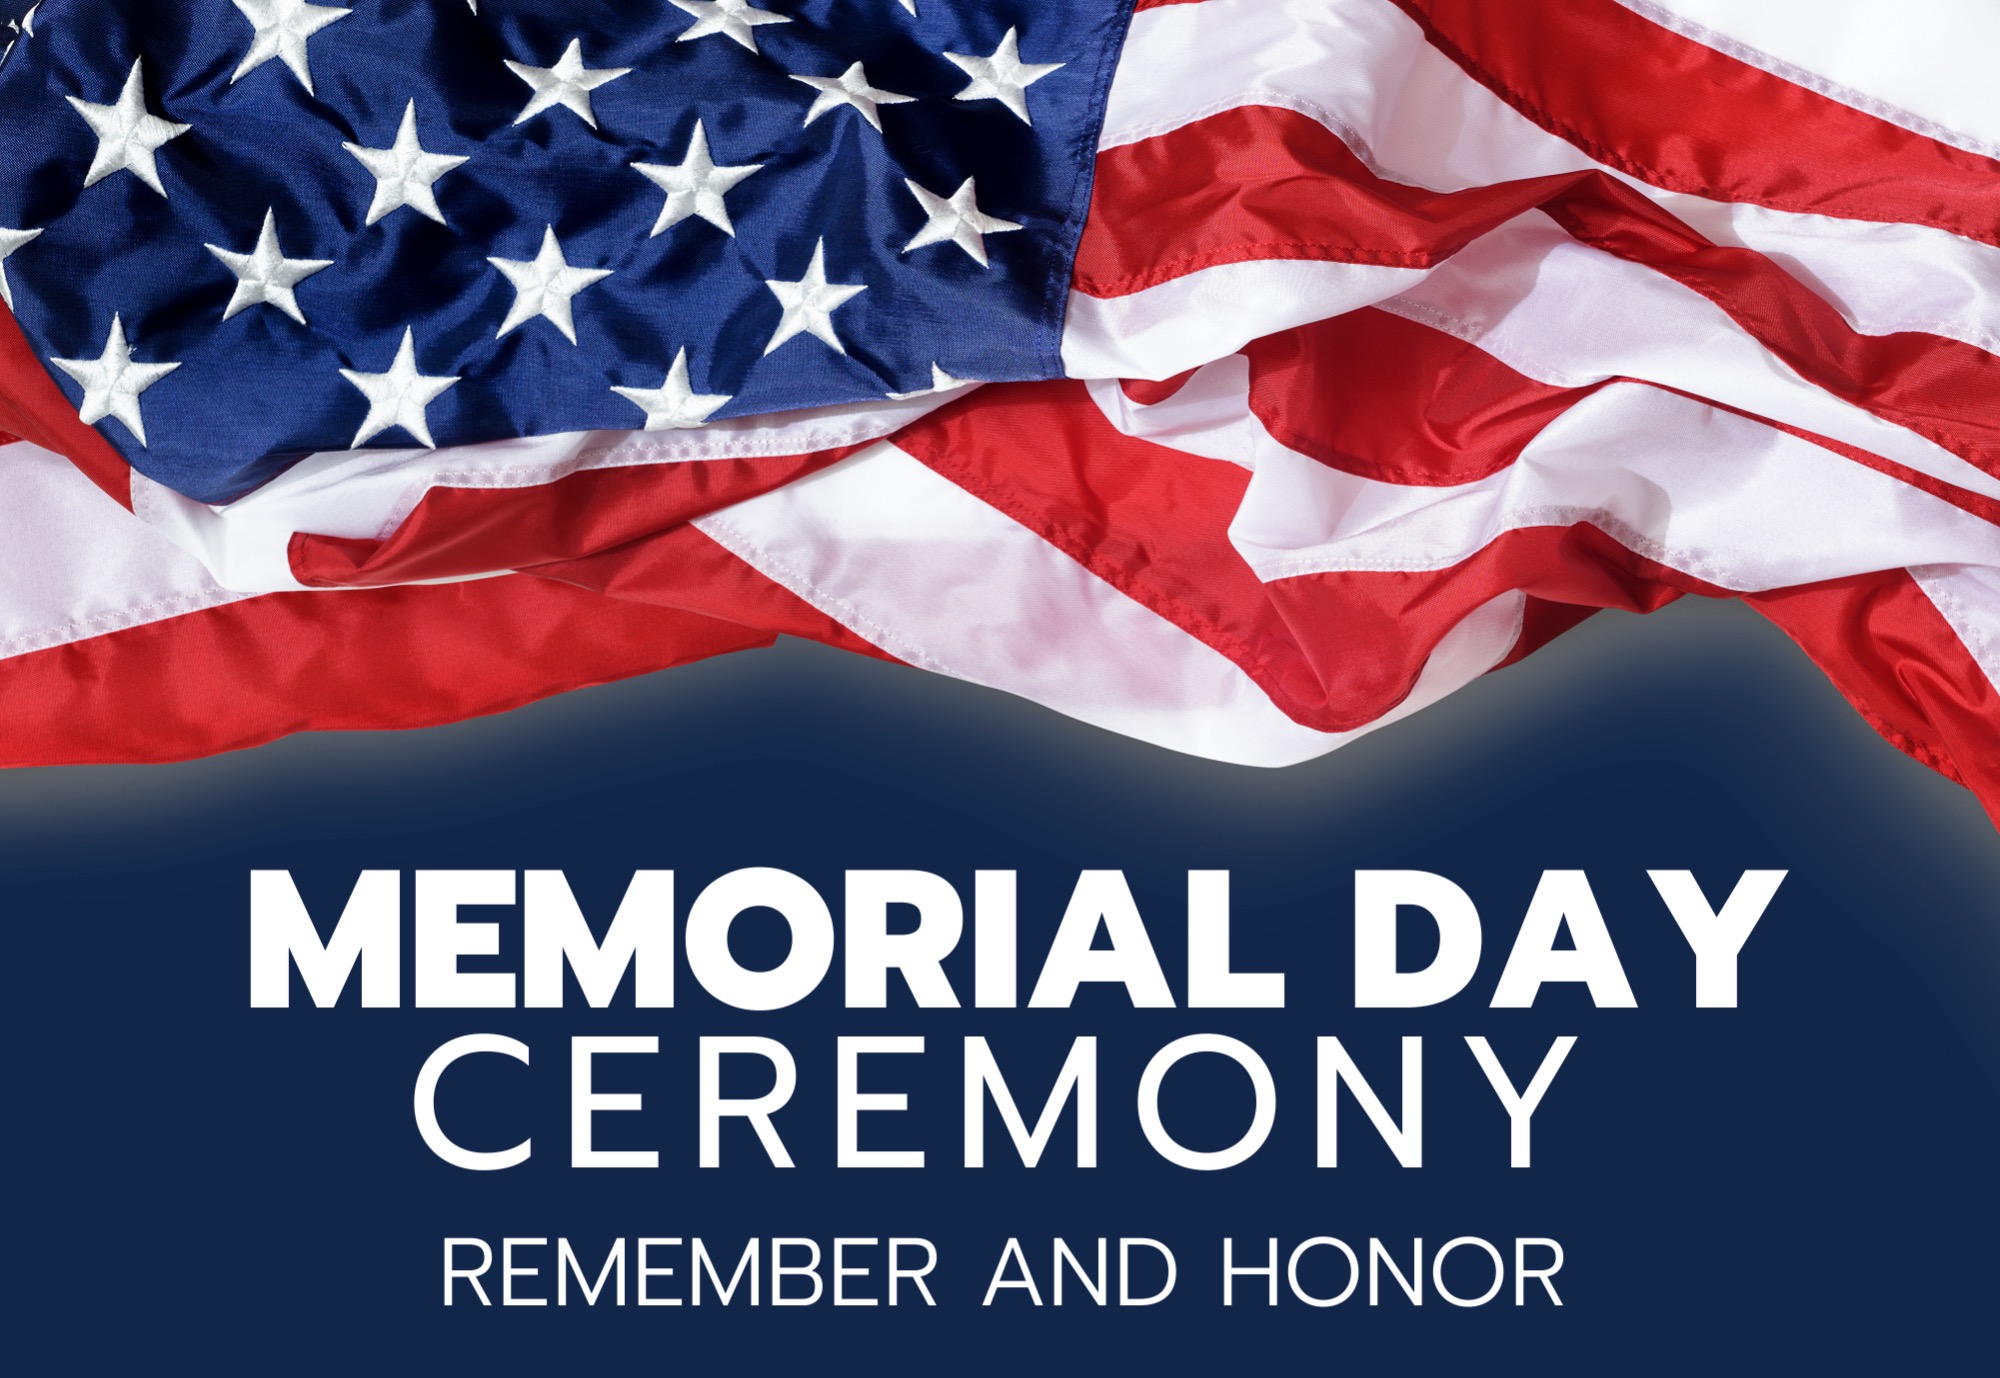 Memorial Day Ceremony graphic with an American flag.